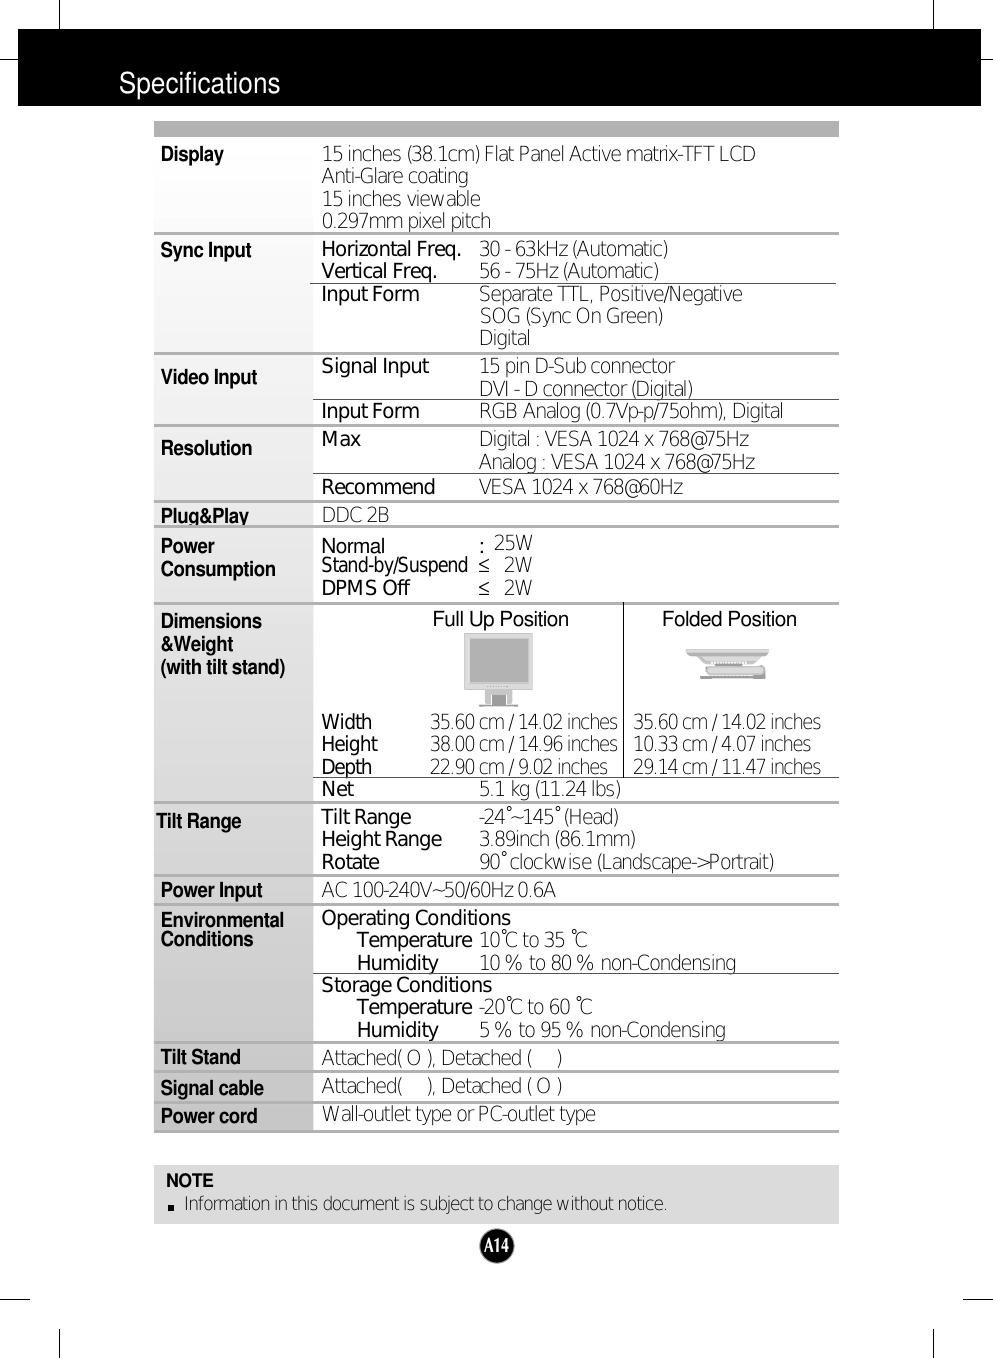 A14SpecificationsNOTEInformation in this document is subject to change without notice.15 inches (38.1cm) Flat Panel Active matrix-TFT LCD Anti-Glare coating15 inches viewable0.297mm pixel pitchHorizontal Freq. 30 - 63kHz (Automatic)Vertical Freq. 56 - 75Hz (Automatic)Input Form Separate TTL, Positive/NegativeSOG (Sync On Green) DigitalSignal Input 15 pin D-Sub connectorDVI - D connector (Digital)Input Form RGB Analog (0.7Vp-p/75ohm), DigitalMax Digital : VESA 1024 x 768@75Hz Analog : VESA 1024 x 768@75HzRecommend VESA 1024 x 768@60HzDDC 2BNormal :25WStand-by/Suspend≤2WDPMS Off ≤2WFull Up Position Folded PositionWidth 35.60 cm / 14.02 inches 35.60 cm / 14.02 inchesHeight 38.00 cm / 14.96 inches 10.33 cm / 4.07 inchesDepth 22.90 cm / 9.02 inches 29.14 cm / 11.47 inchesNet 5.1 kg (11.24 lbs)Tilt Range -24˚~145˚ (Head)Height Range 3.89inch (86.1mm)Rotate 90˚ clockwise (Landscape-&gt;Portrait)AC 100-240V~50/60Hz 0.6AOperating ConditionsTemperature 10˚C to 35 ˚CHumidity 10 % to 80 % non-CondensingStorage ConditionsTemperature -20˚C to 60 ˚CHumidity 5 % to 95 % non-CondensingAttached( O ), Detached (     )Attached(     ), Detached ( O )Wall-outlet type or PC-outlet typeDisplaySync InputVideo InputResolutionPlug&amp;PlayPower   ConsumptionDimensions&amp;Weight(with tilt stand)Tilt RangePower InputEnvironmental ConditionsTilt StandSignal cablePower cord 